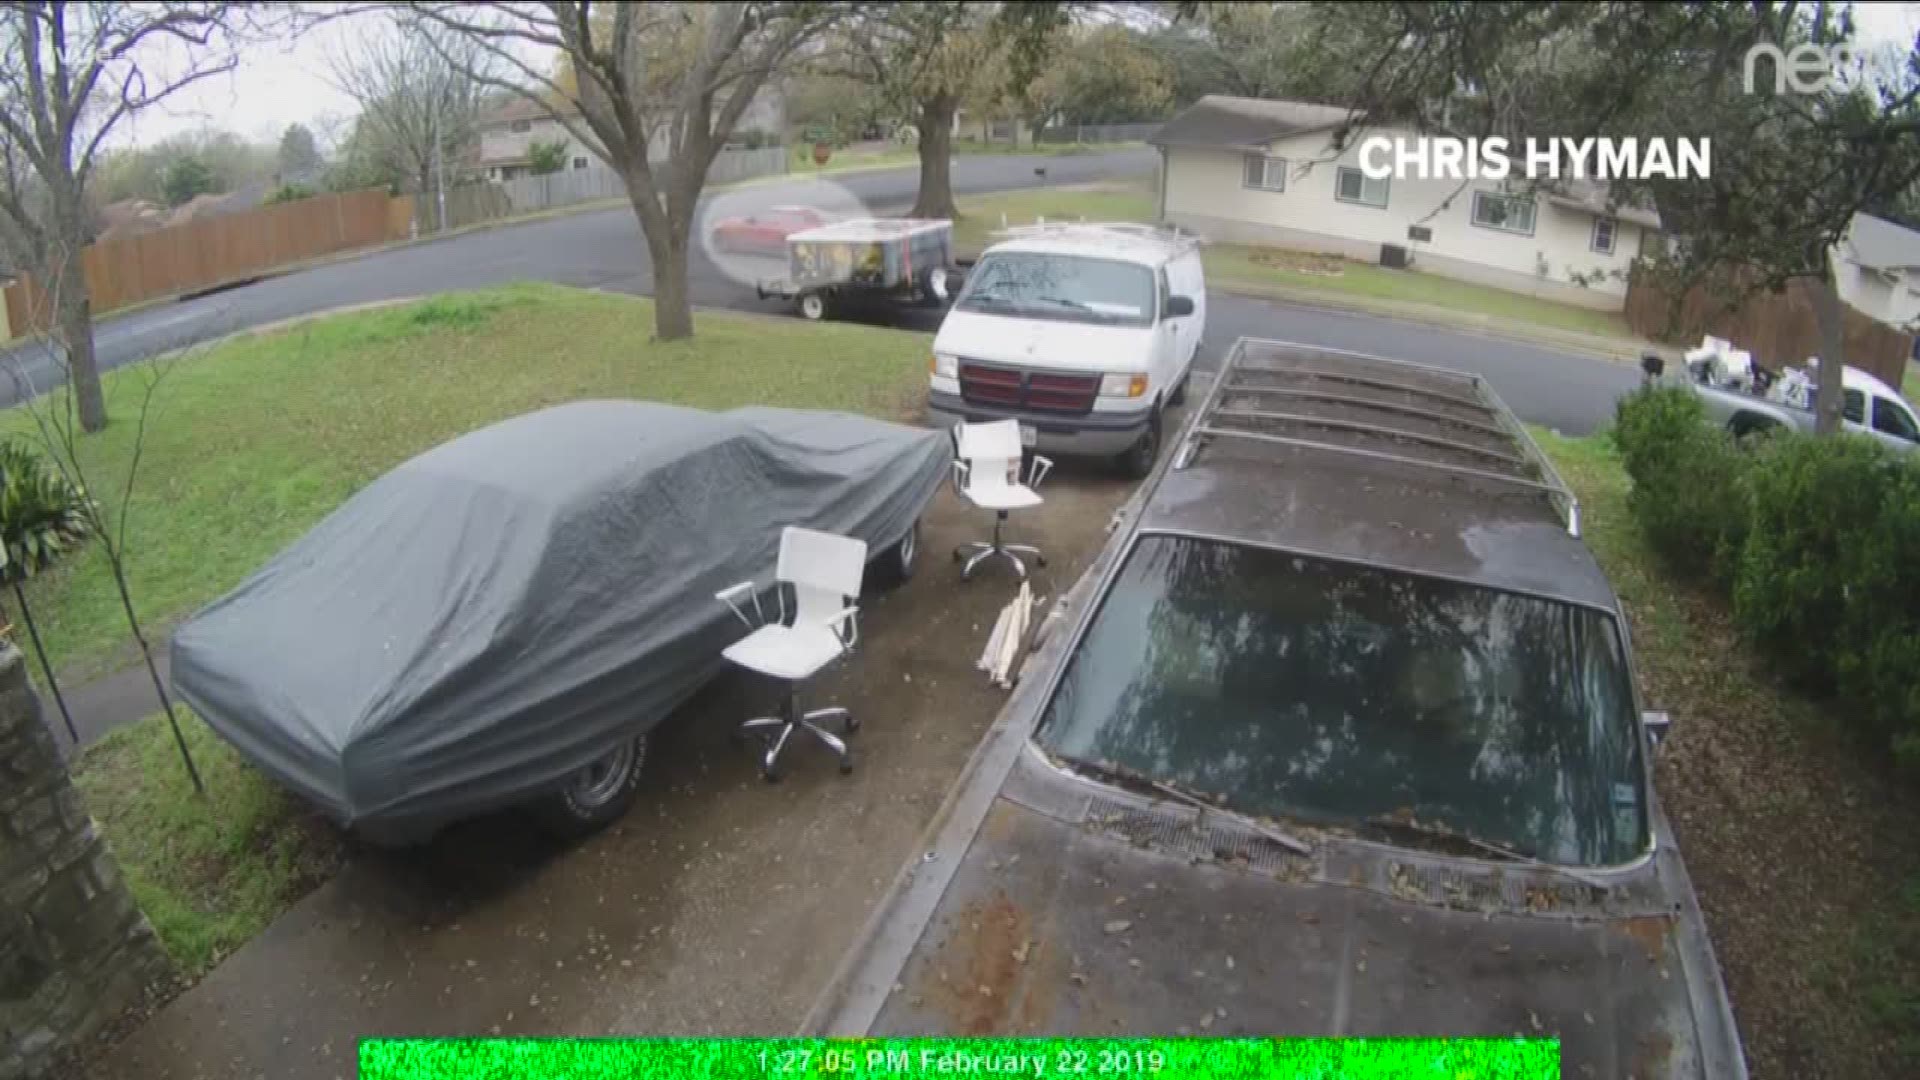 A Nest camera caught the moment a driver crashed into a house in South Austin.